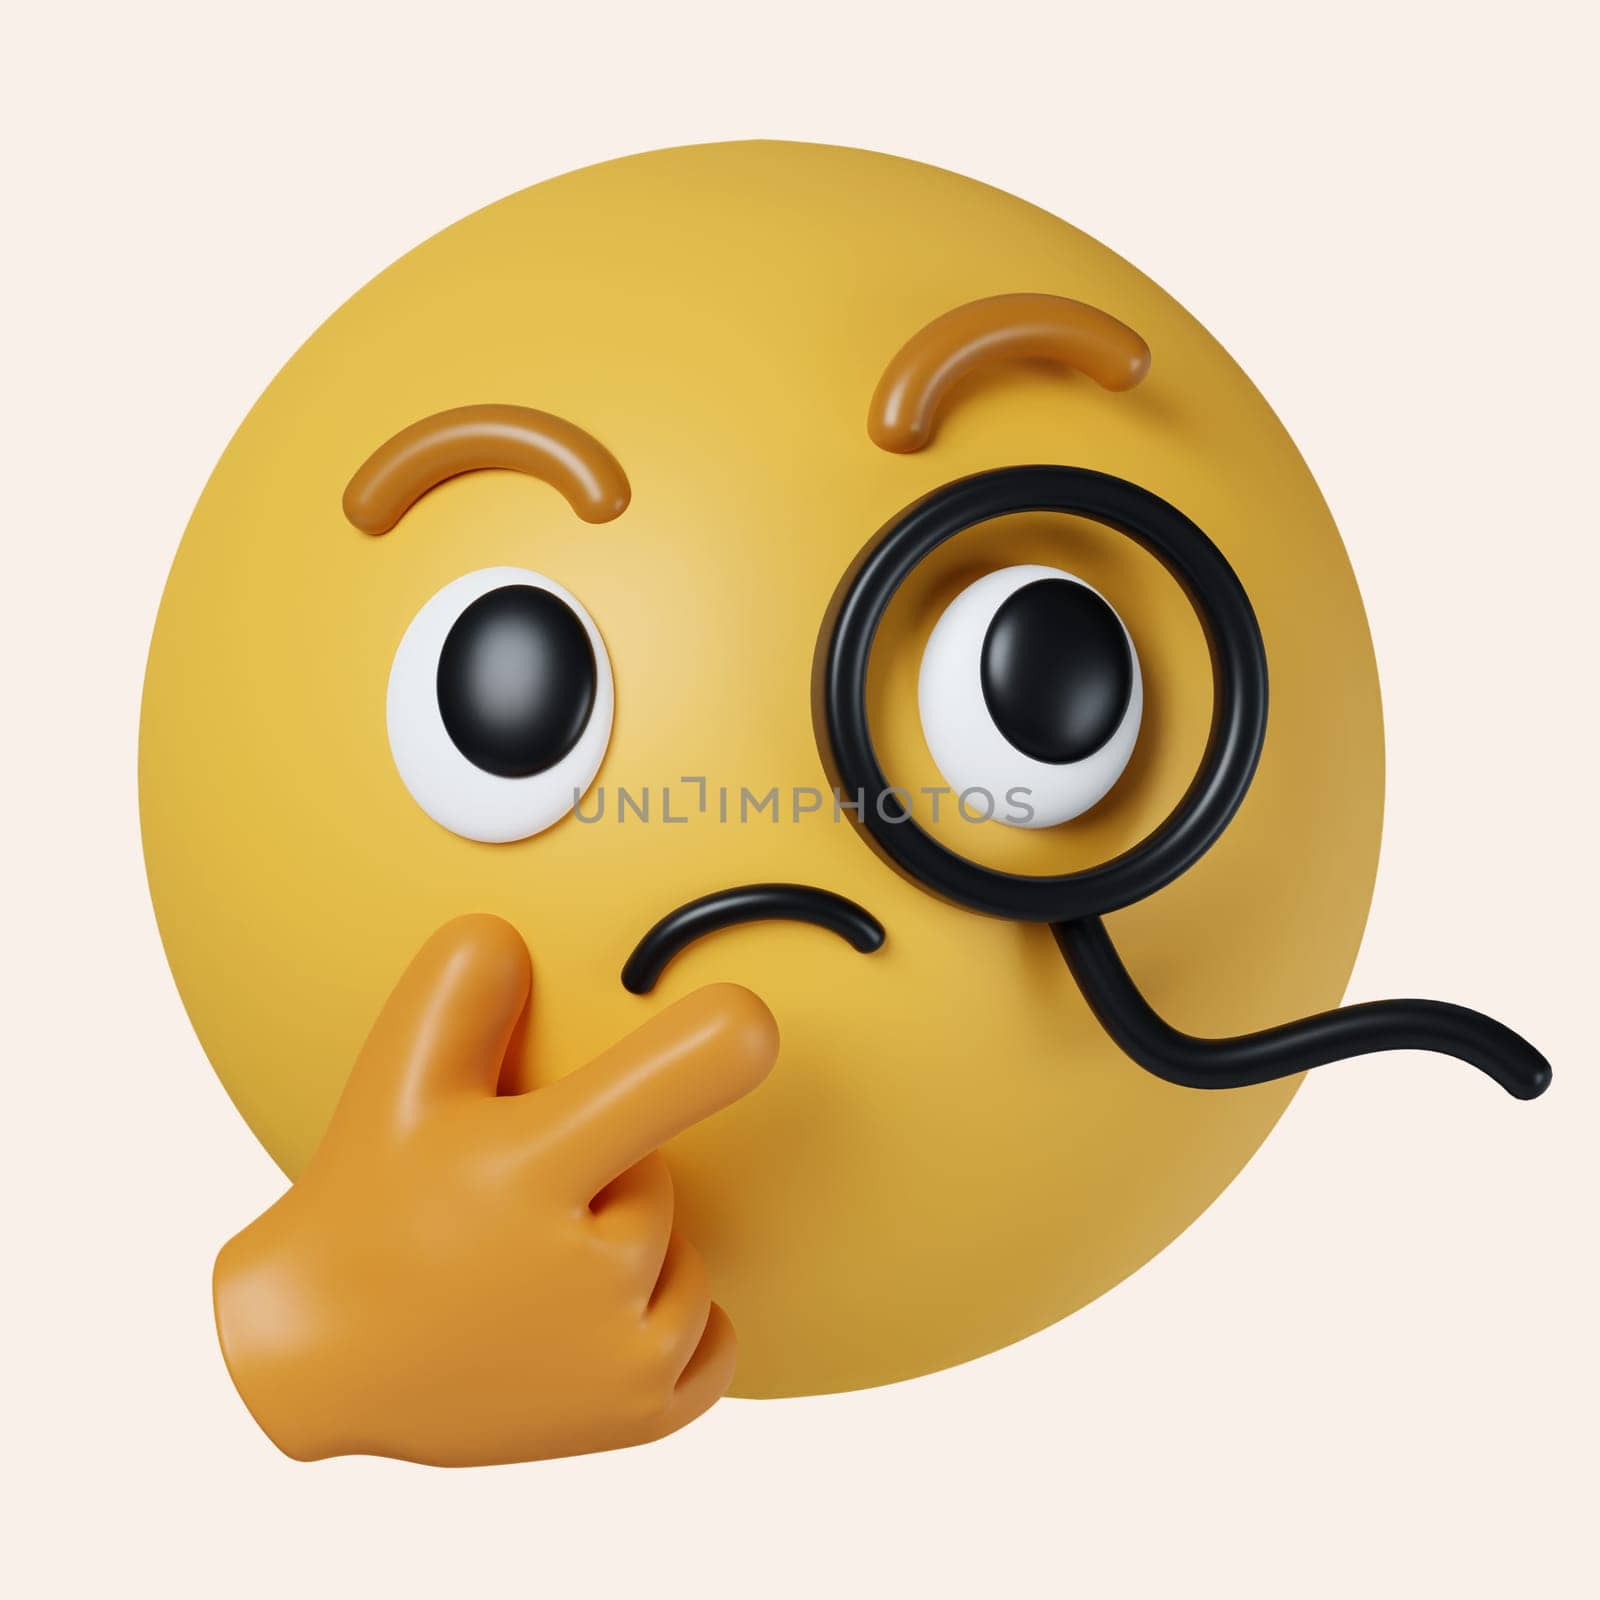 3d thinking face emoji. emoticon face with a single finger and thumb resting on the chin glancing upward. icon isolated on gray background. 3d rendering illustration. Clipping path. by meepiangraphic